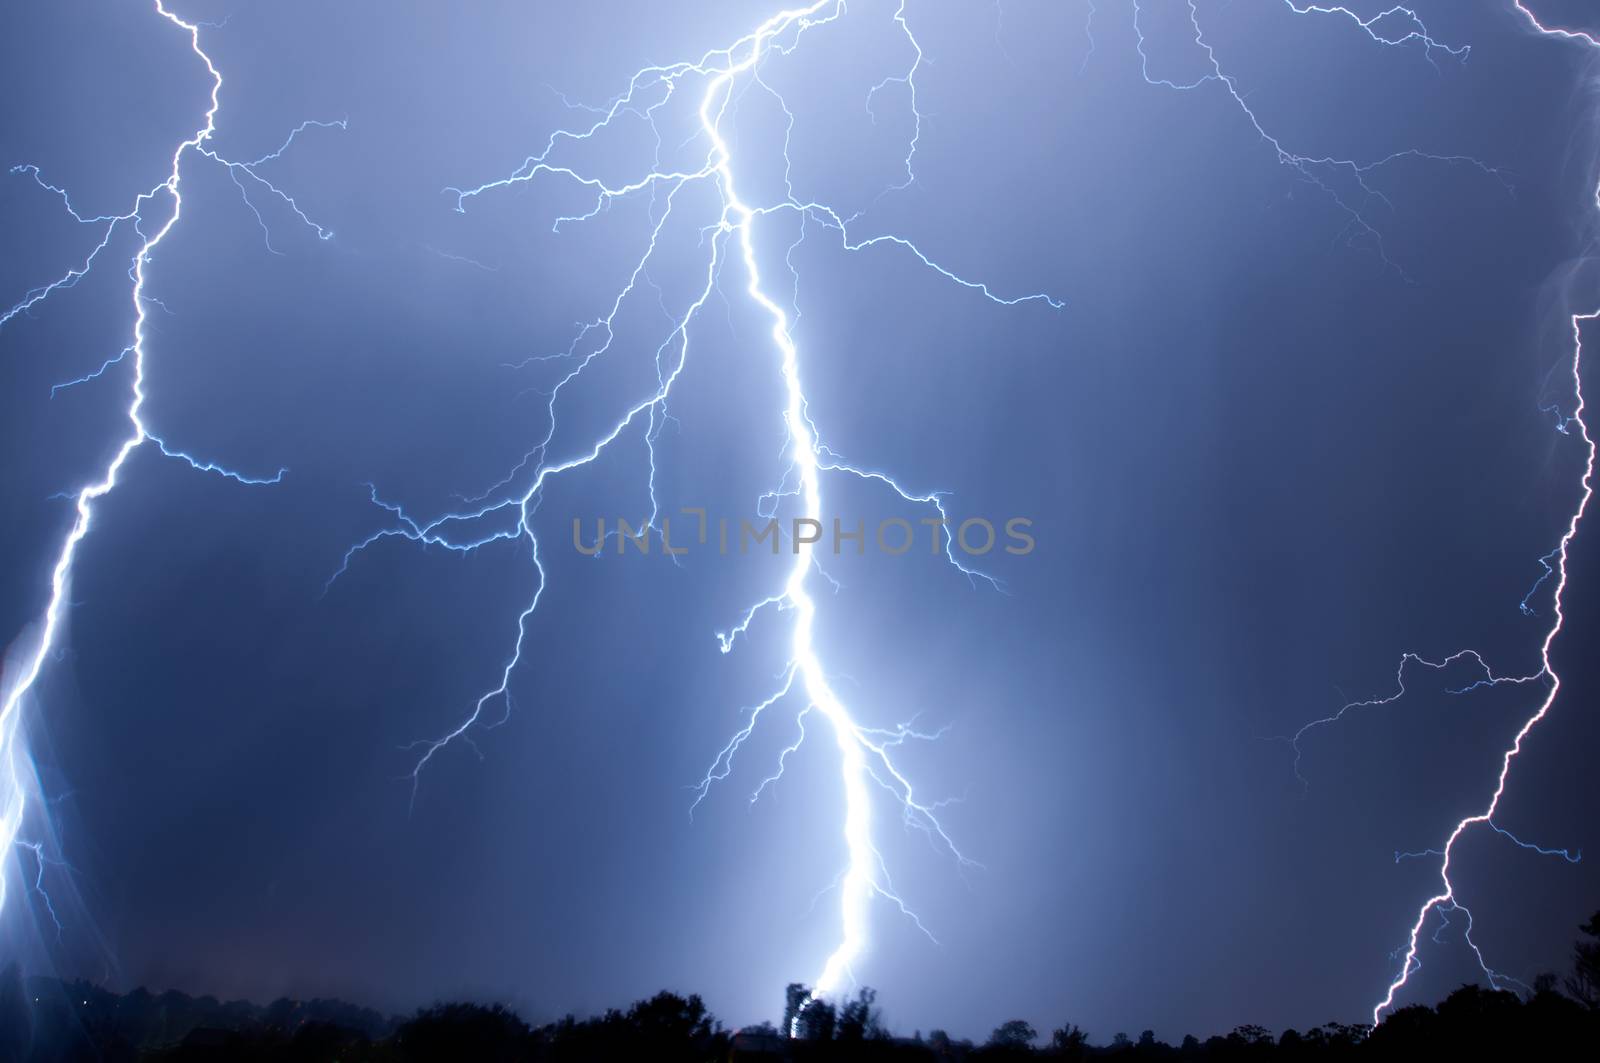 Lightning, Weather and Storms in night skies